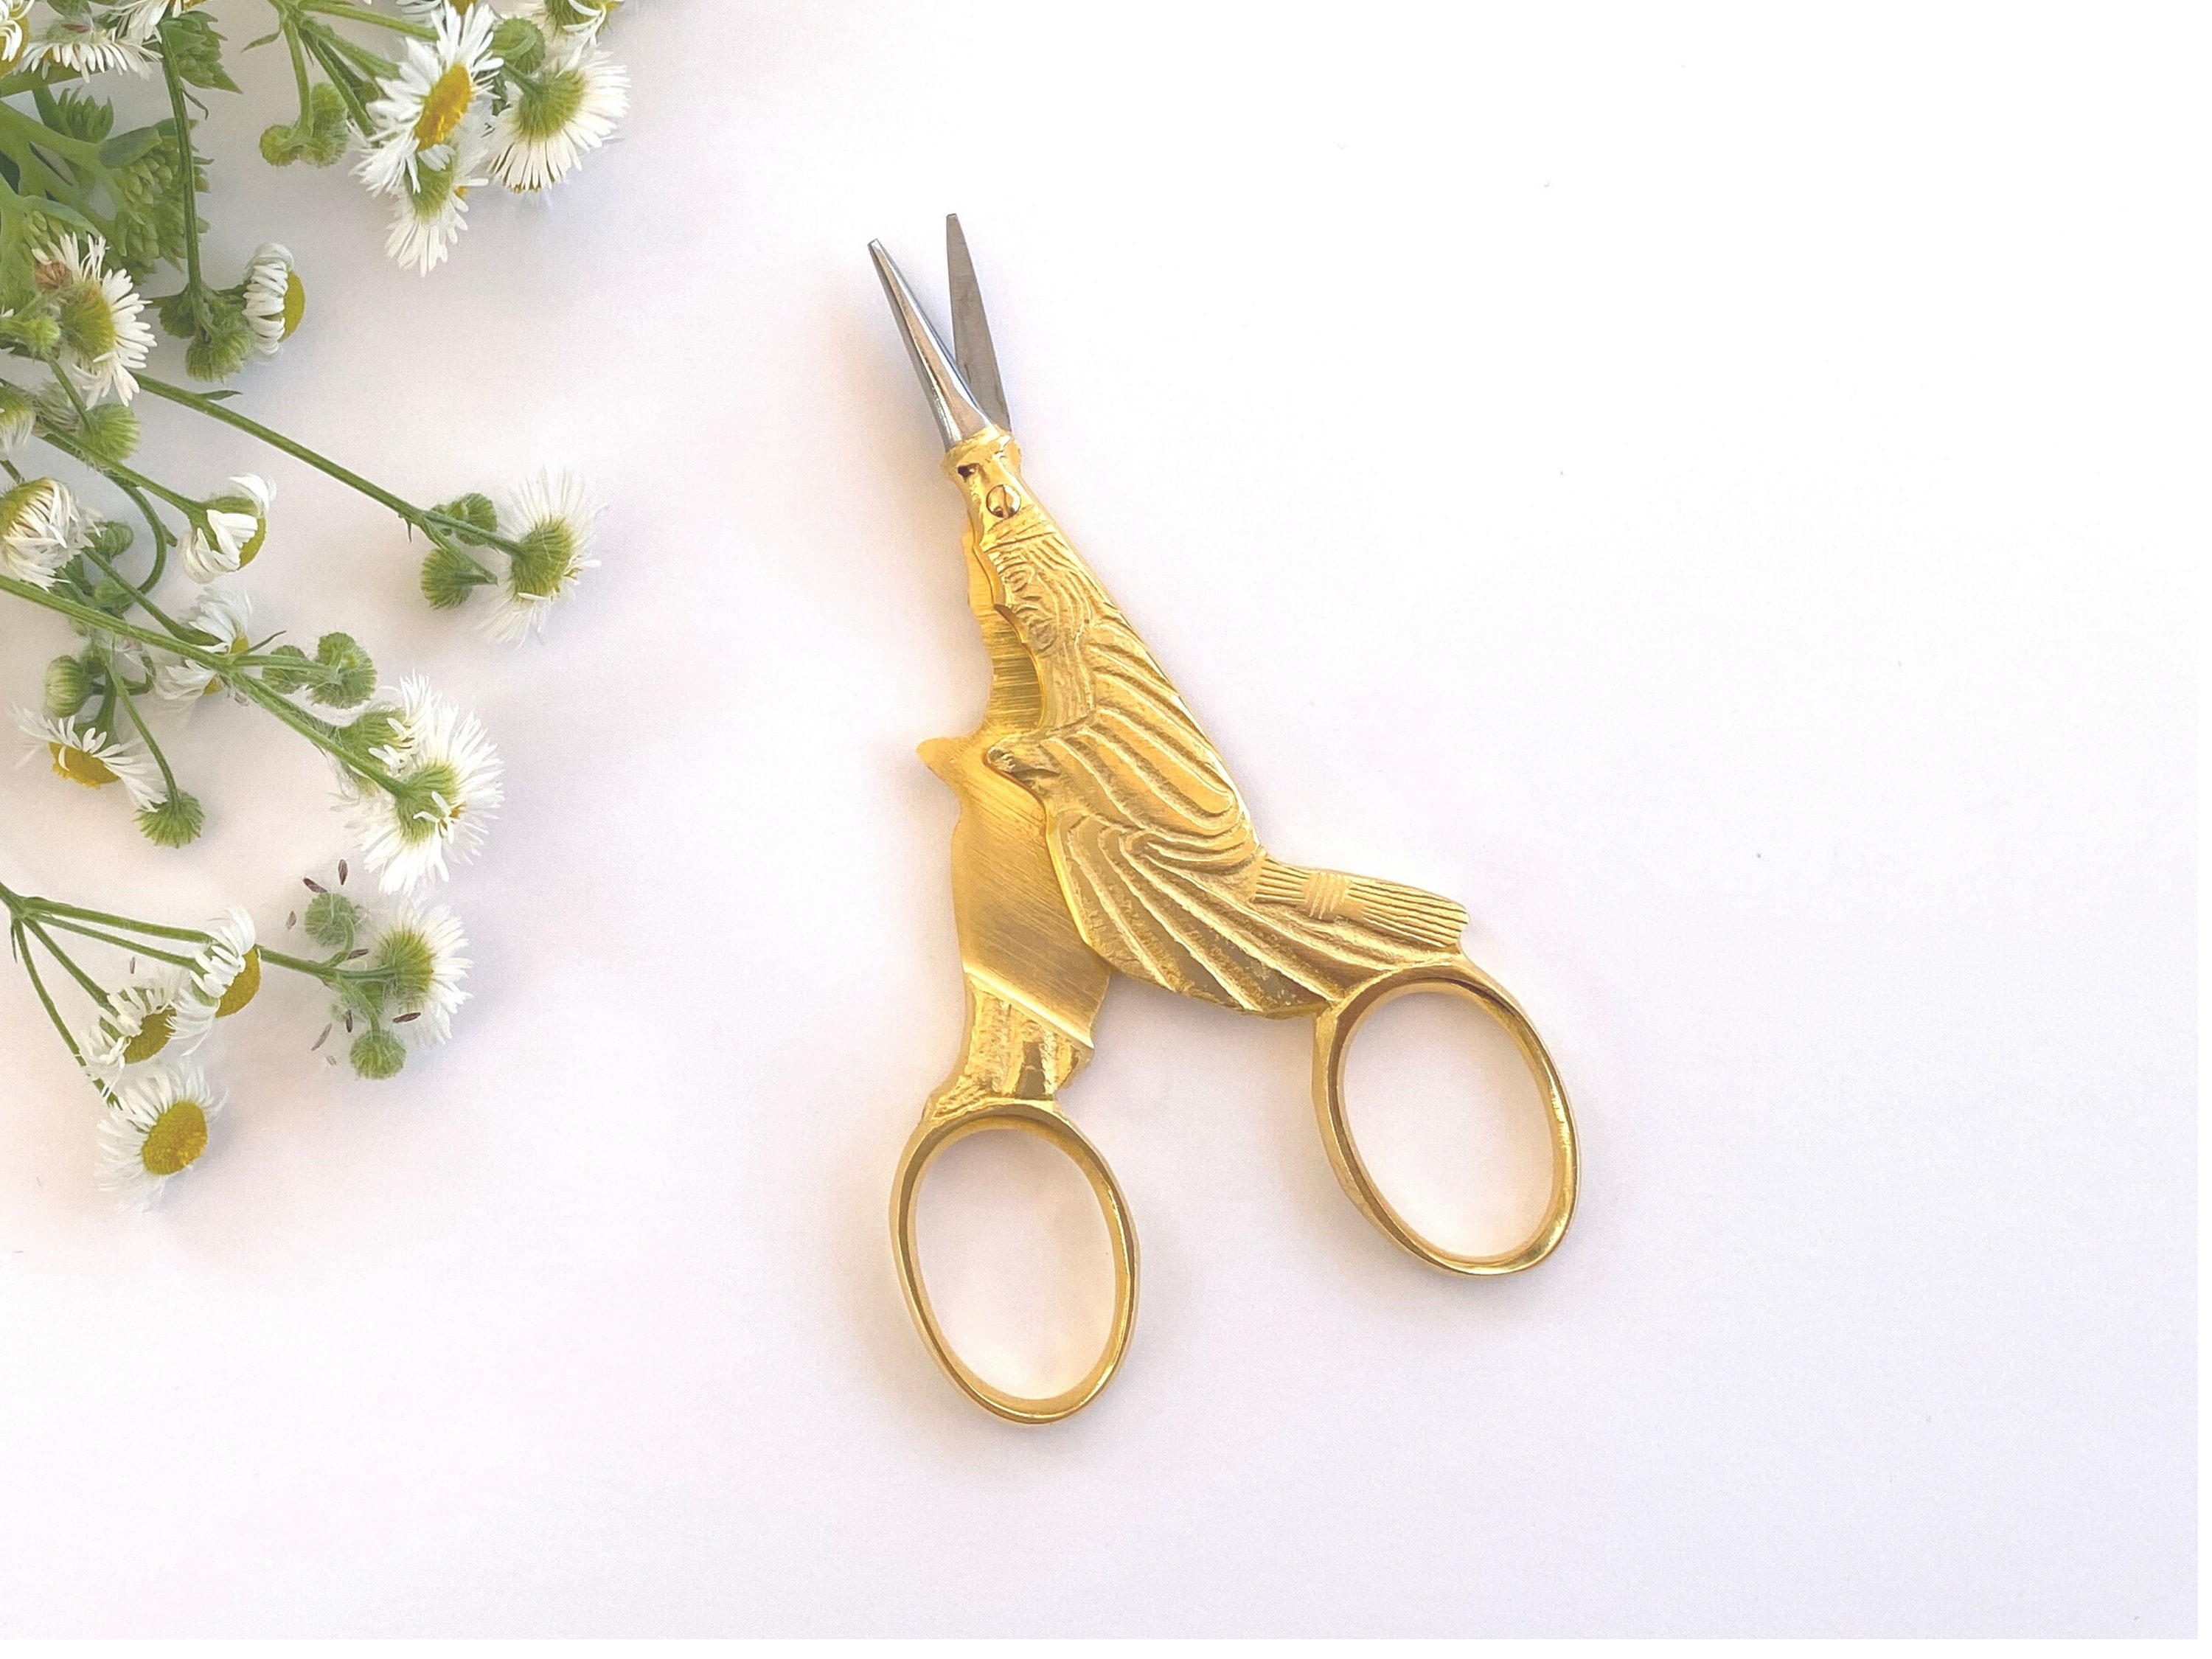 Embroidery Scissors, Cross Stitch & Embroidery